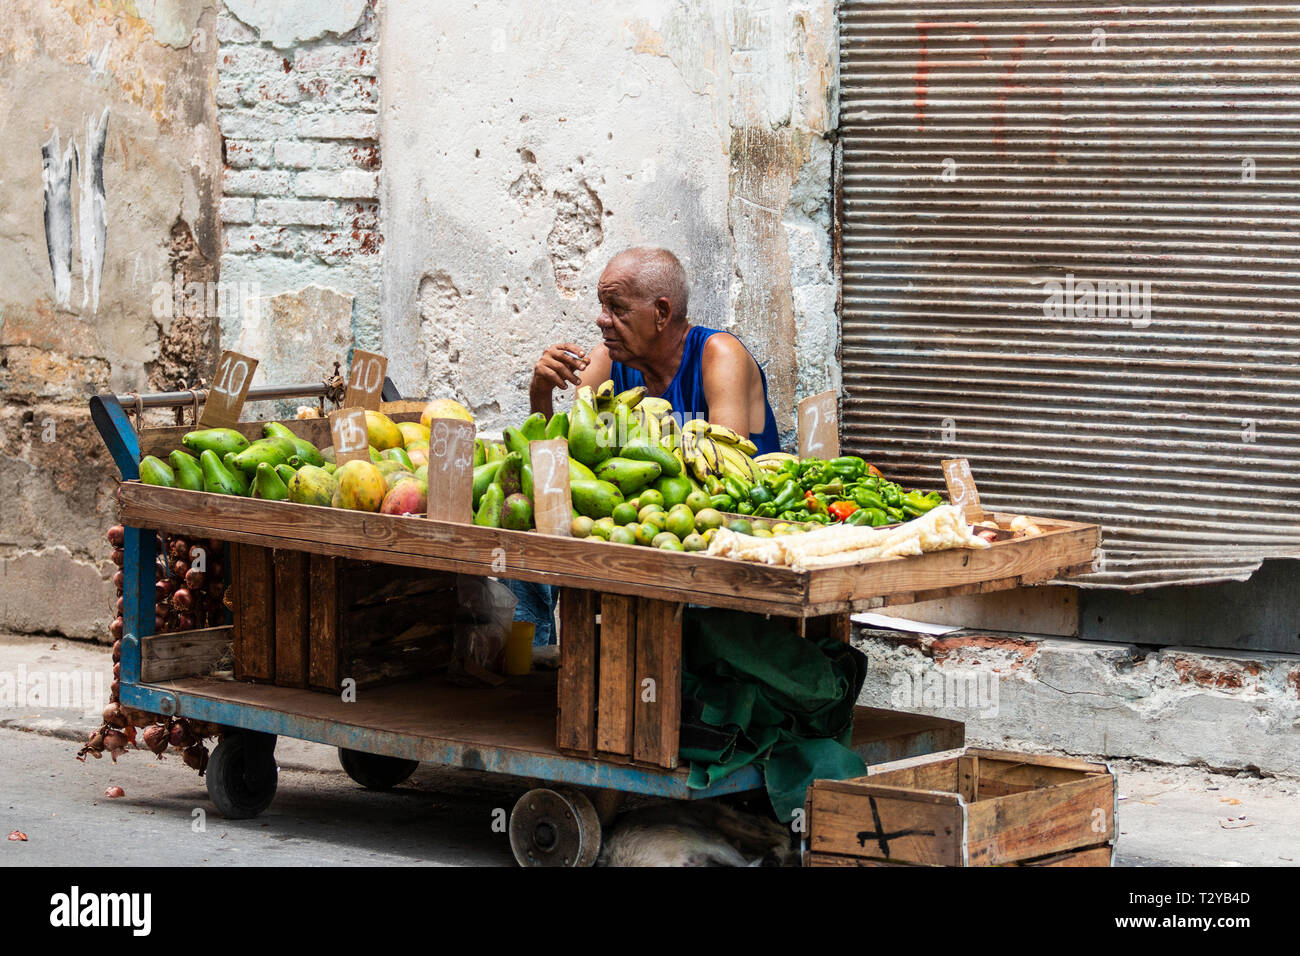 Havana, Cuba - 25 July 2018: A man sitting behind his fruit cart smoking a cigarette while selling fruit on the streets of Havana Cuba. Stock Photo